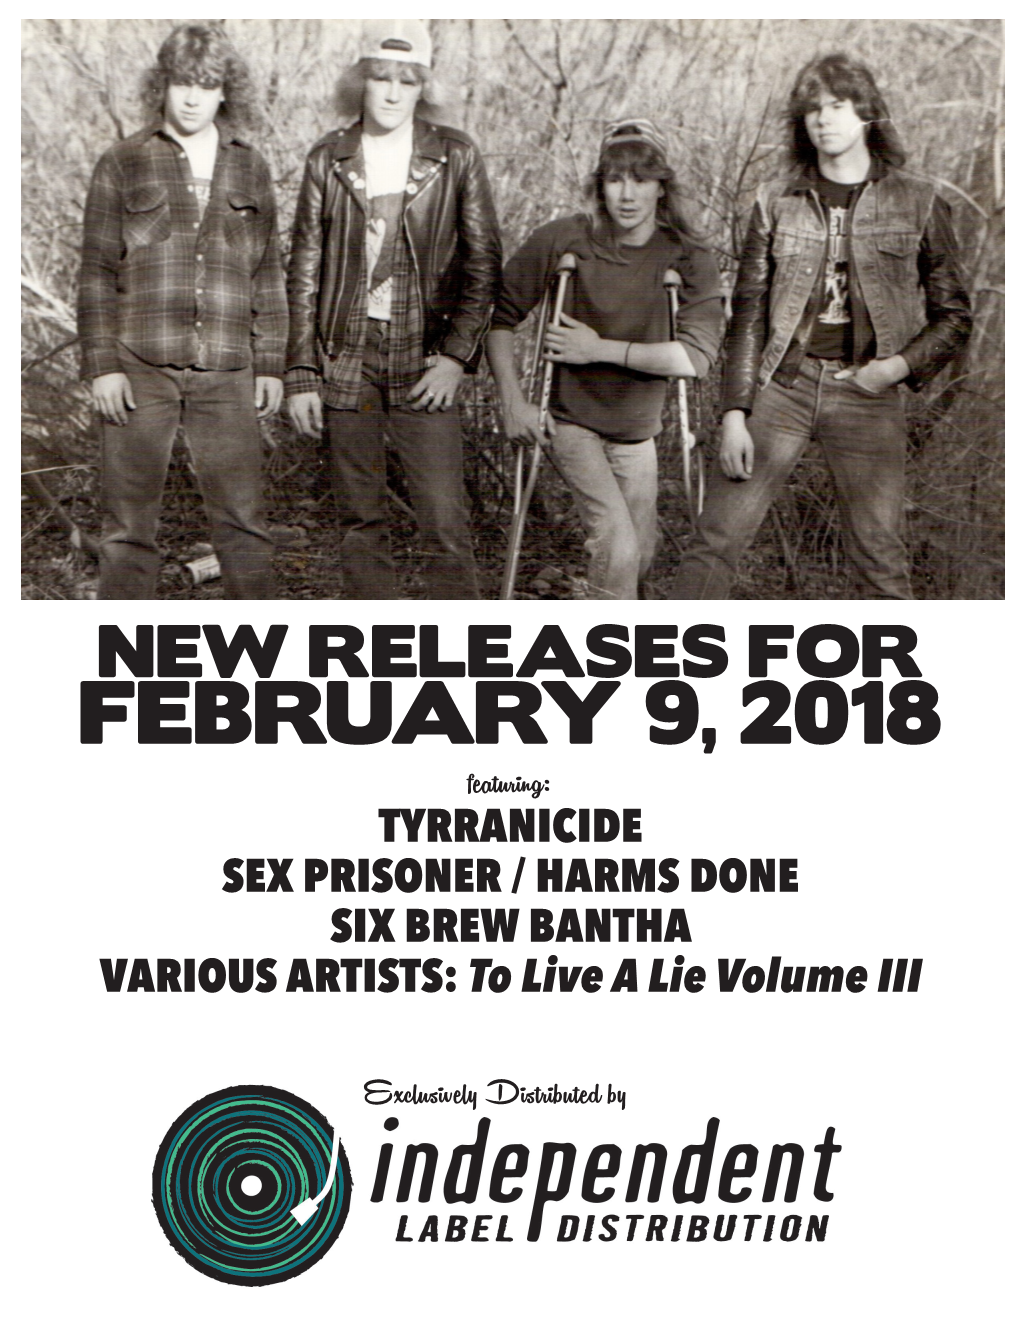 FEBRUARY 9, 2018 Featuring: TYRRANICIDE SEX PRISONER / HARMS DONE SIX BREW BANTHA VARIOUS ARTISTS: to Live a Lie Volume III